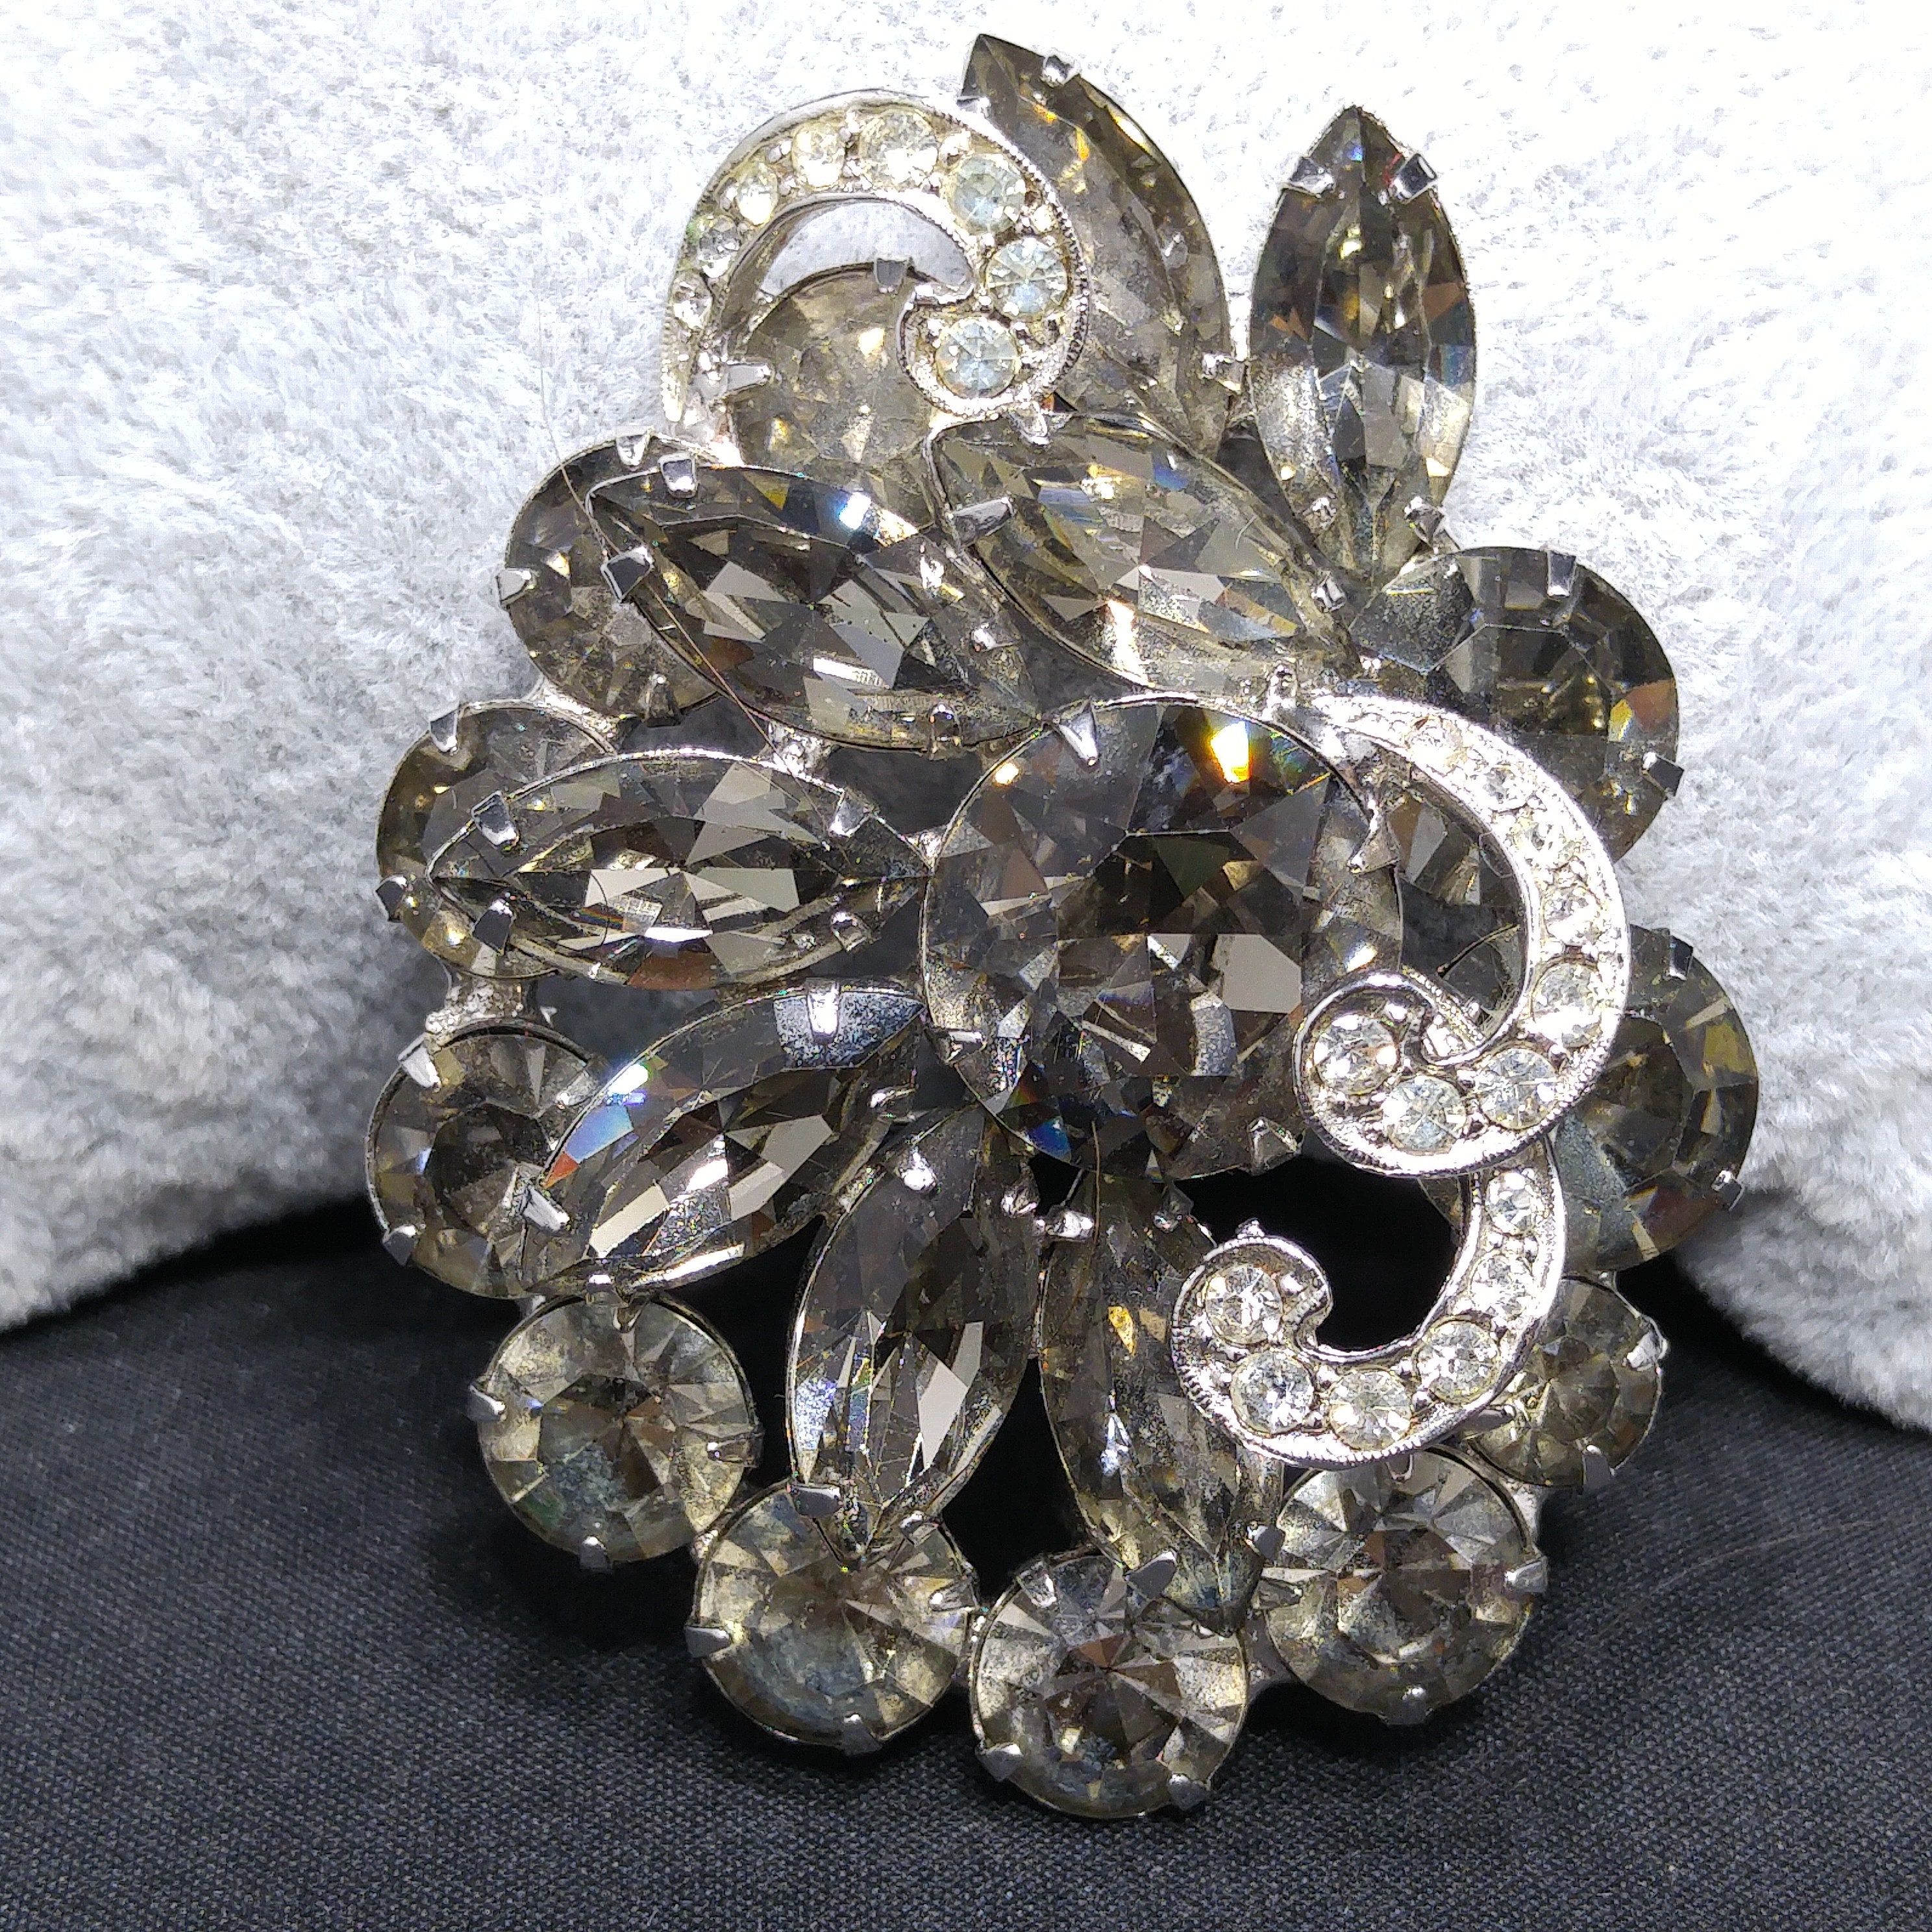 HardyDryGoods Vintage 50s 60s Corocraft White Onion Gold Brooch Pin - Rhinestone Crystals - Vegetable Produce - Rockabilly Pin Up - Mid Century Jewelry